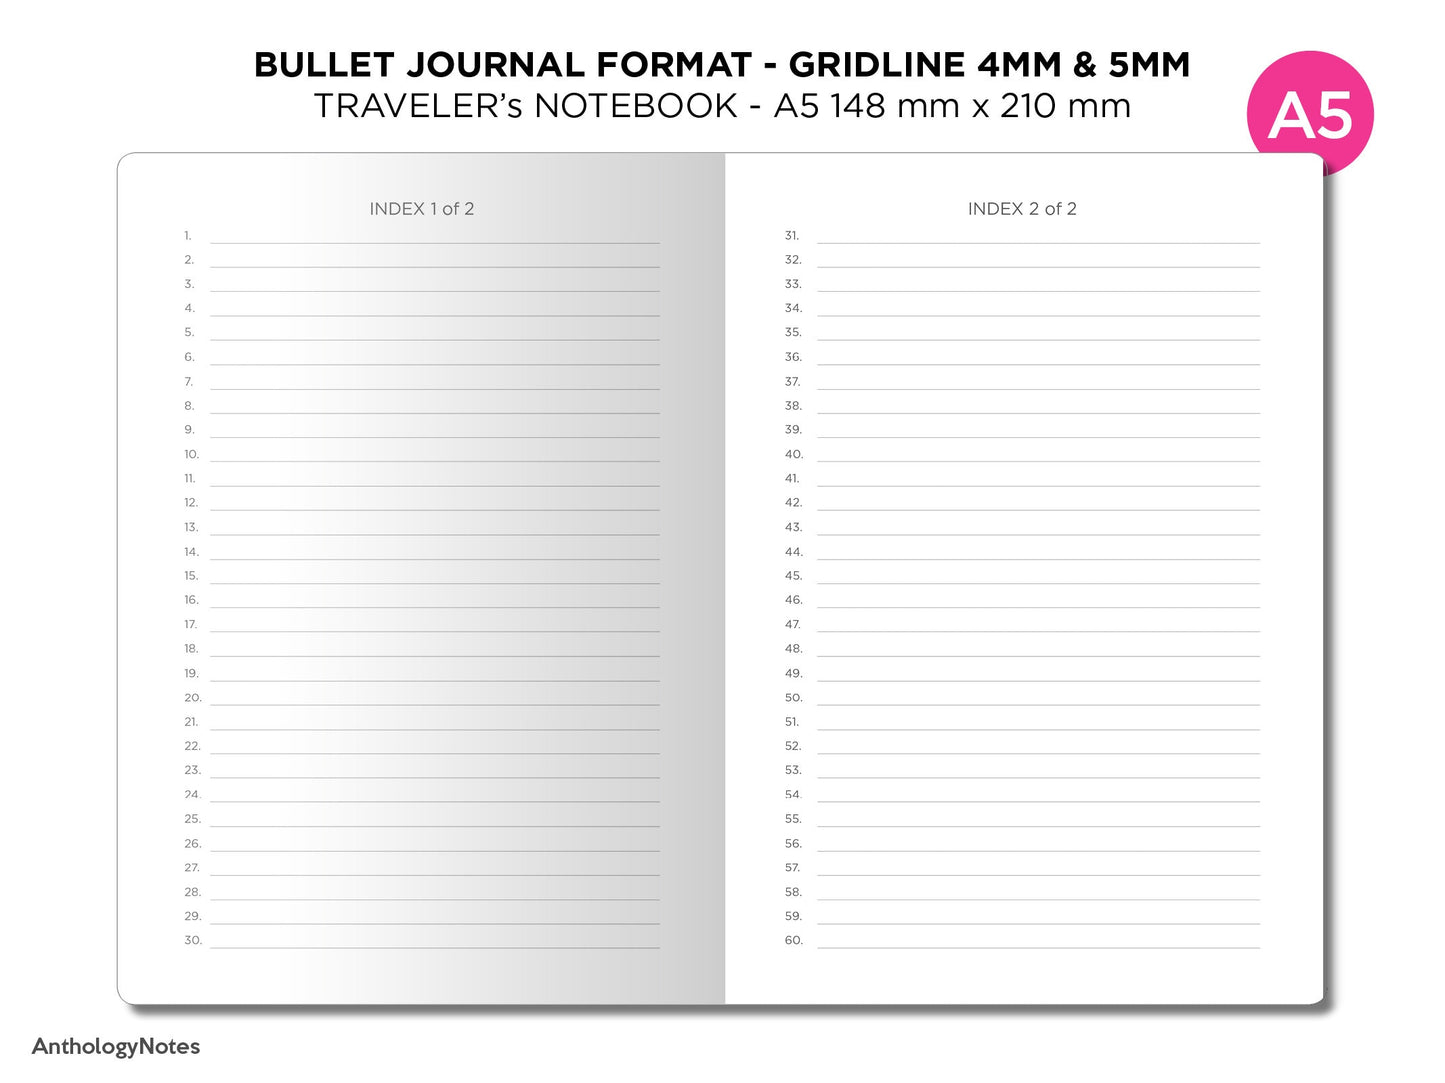 Bullet Log GRID - Traveler's Notebook A5 - Bujo Format - Numbered Pages, Key Page, Index Page - 5mm & 4mm